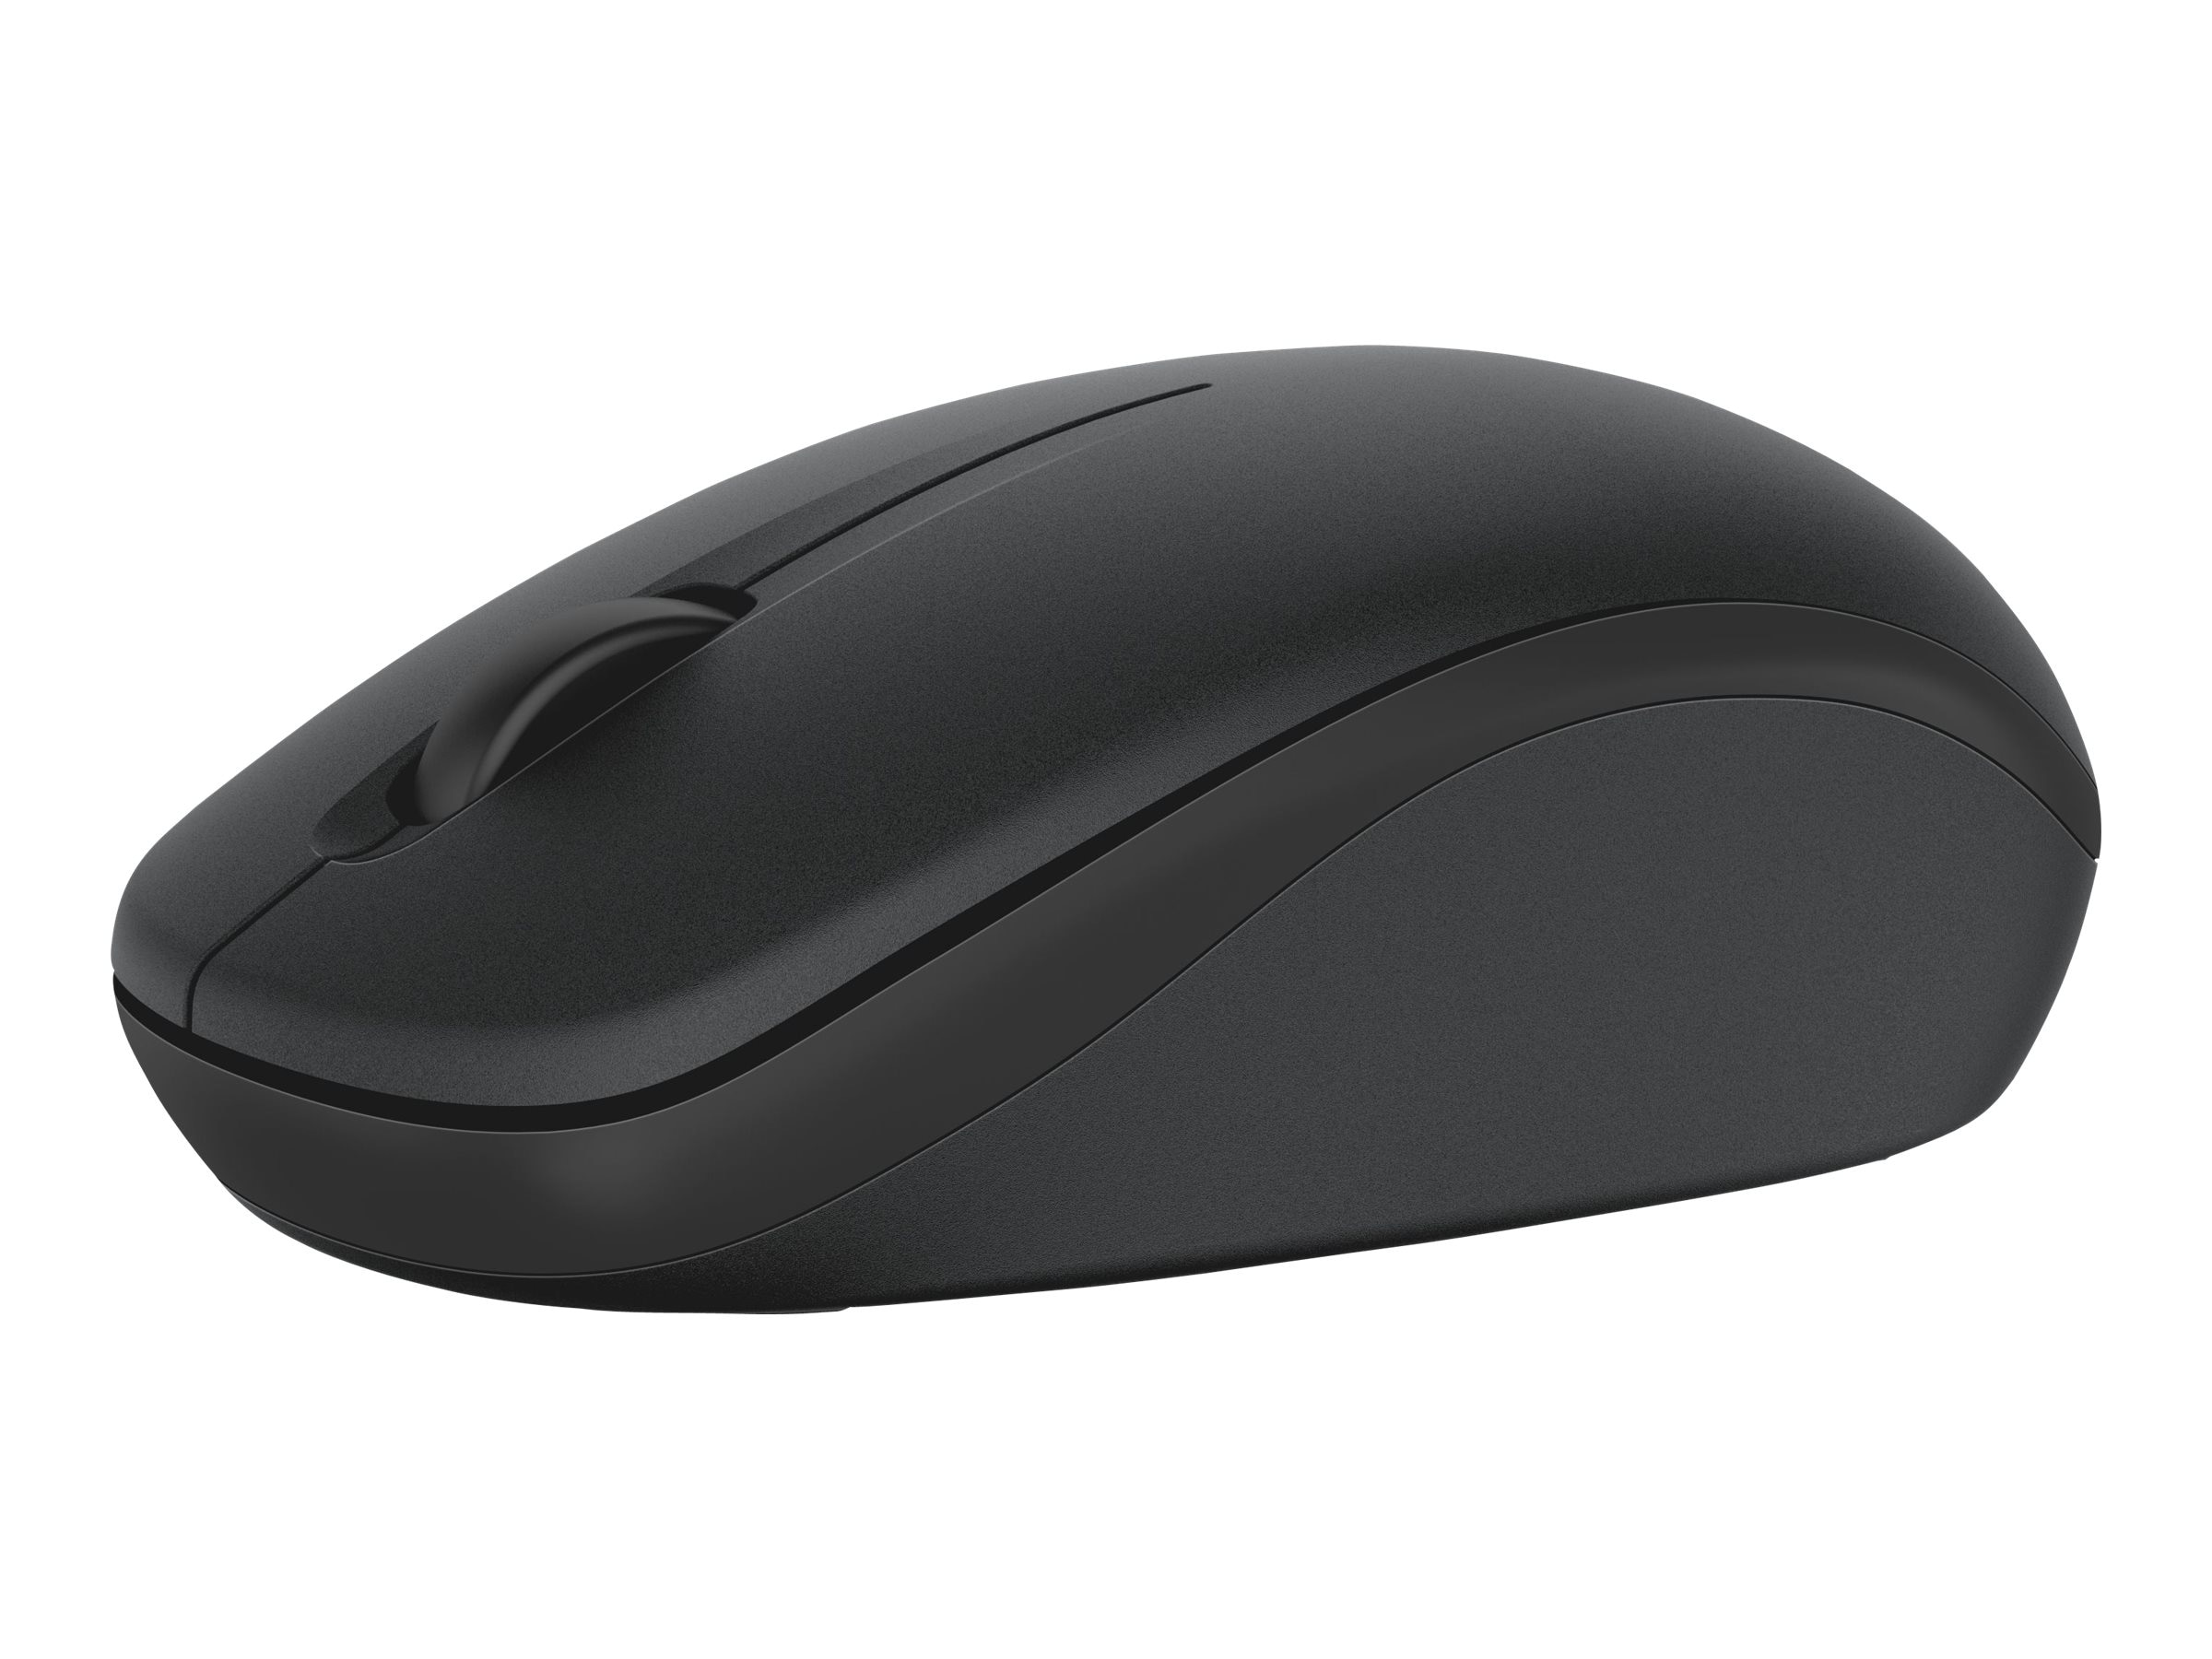 Dell WM126 Wireless Optical Mouse, Black